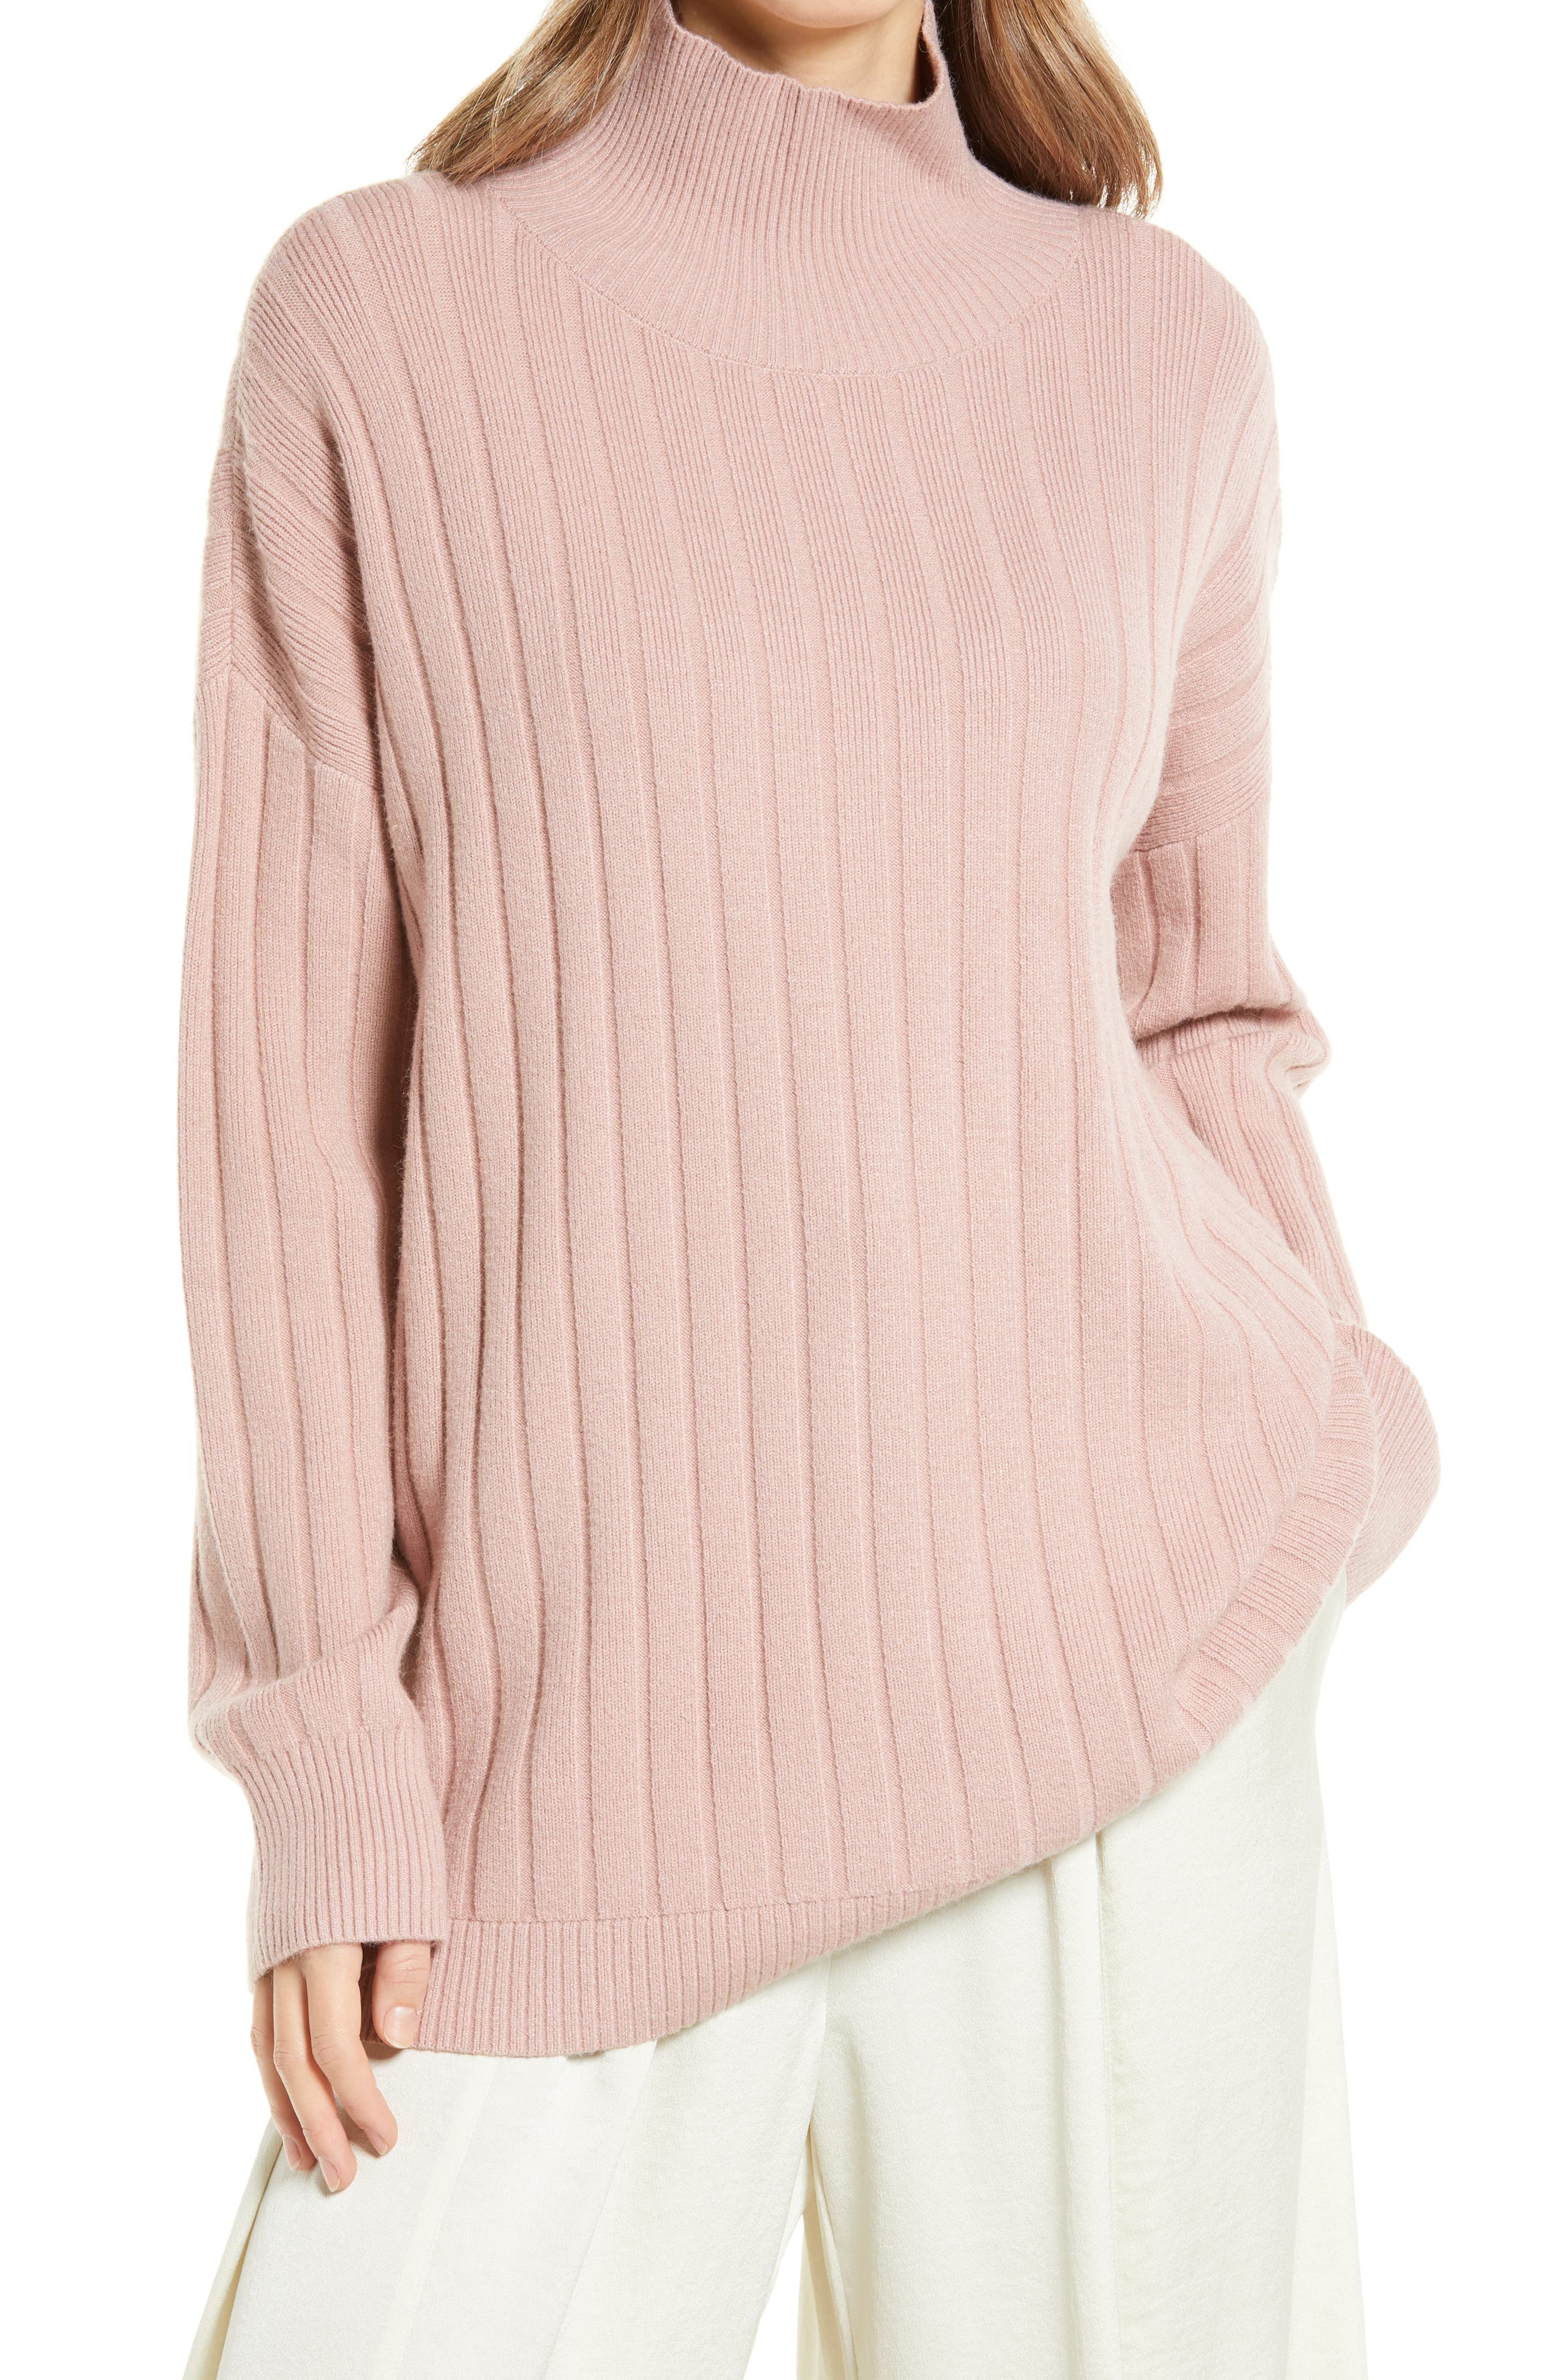 Women's Pink Tunic Sweaters | Nordstrom